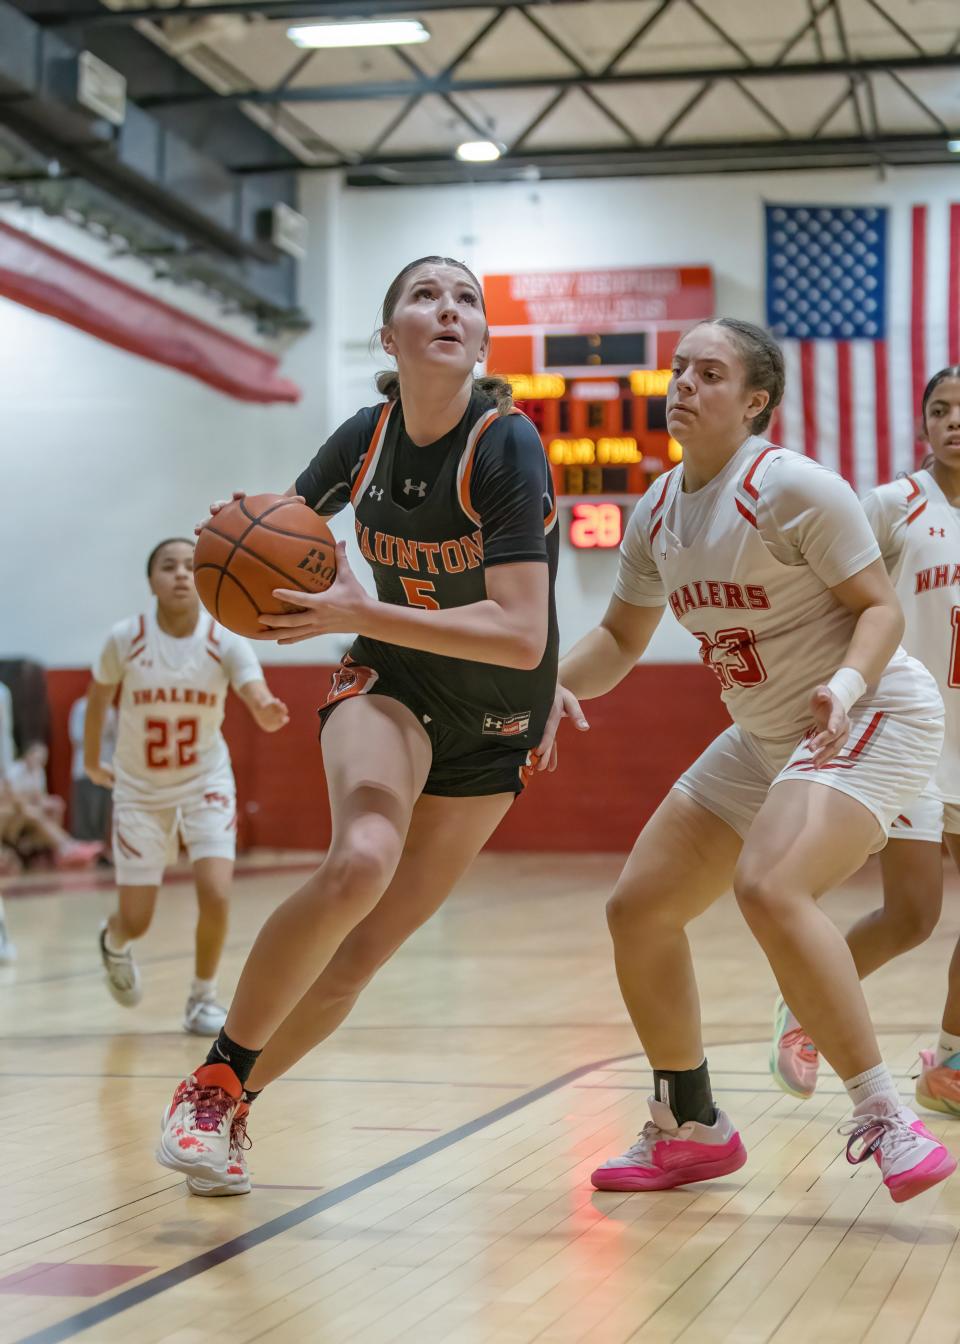 Taunton's Taryn Campbell drives to the basket while New Bedford's Zaria Anderson defends on the play.